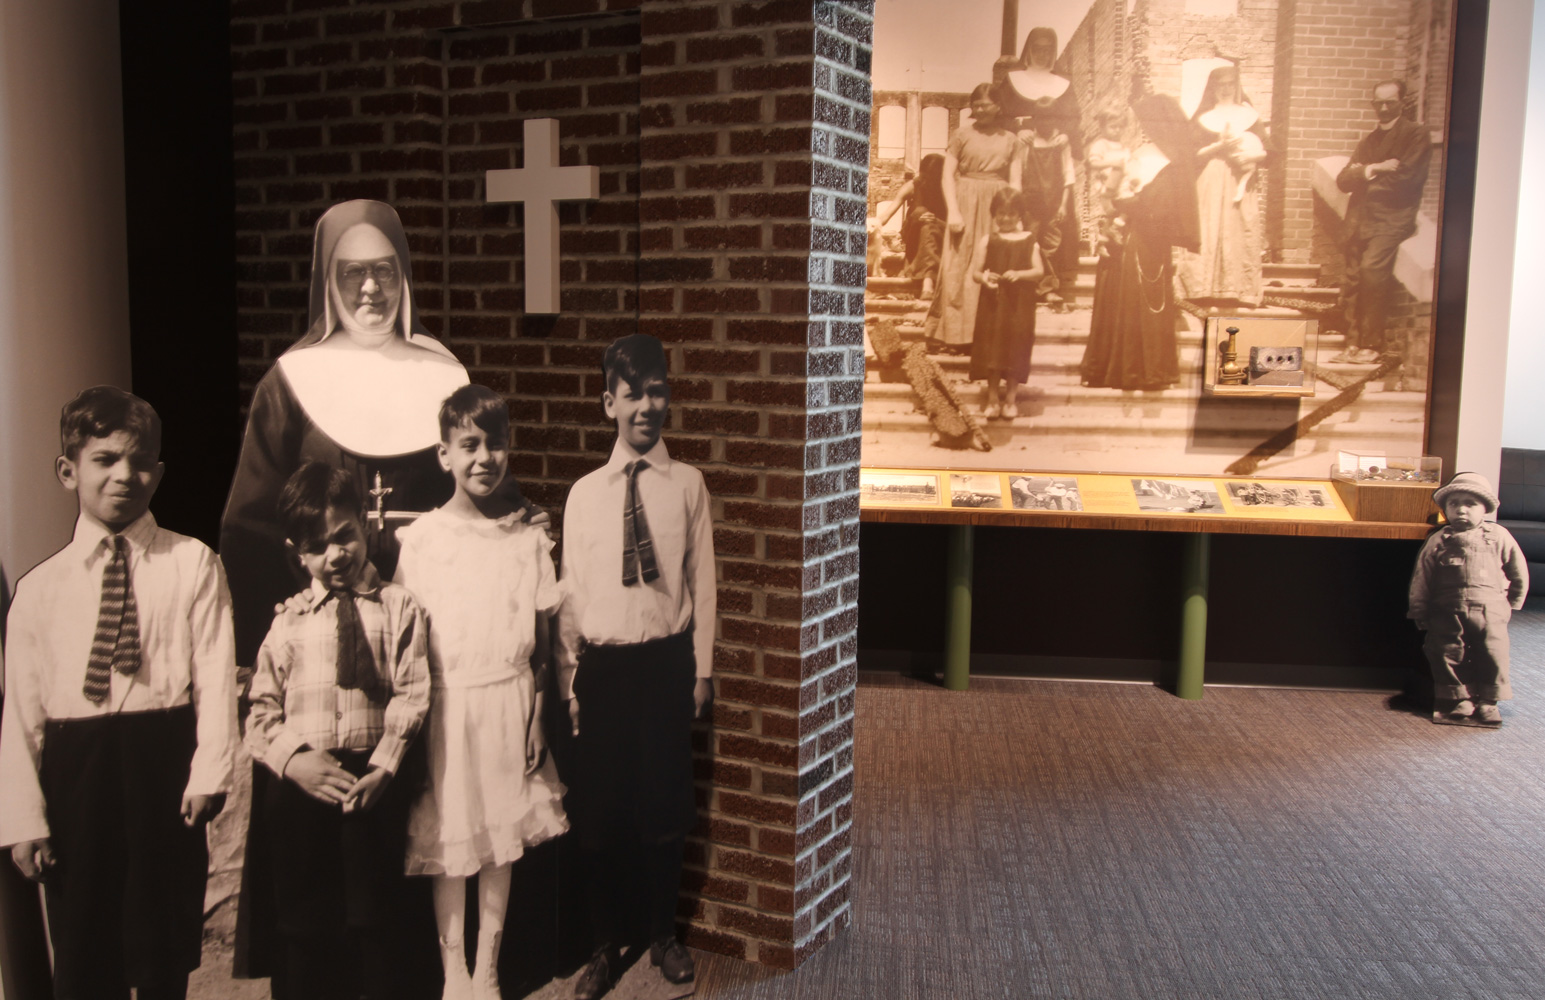 St. Joseph’s Alumni & Historical Center features historical displays and special features for alumni. 